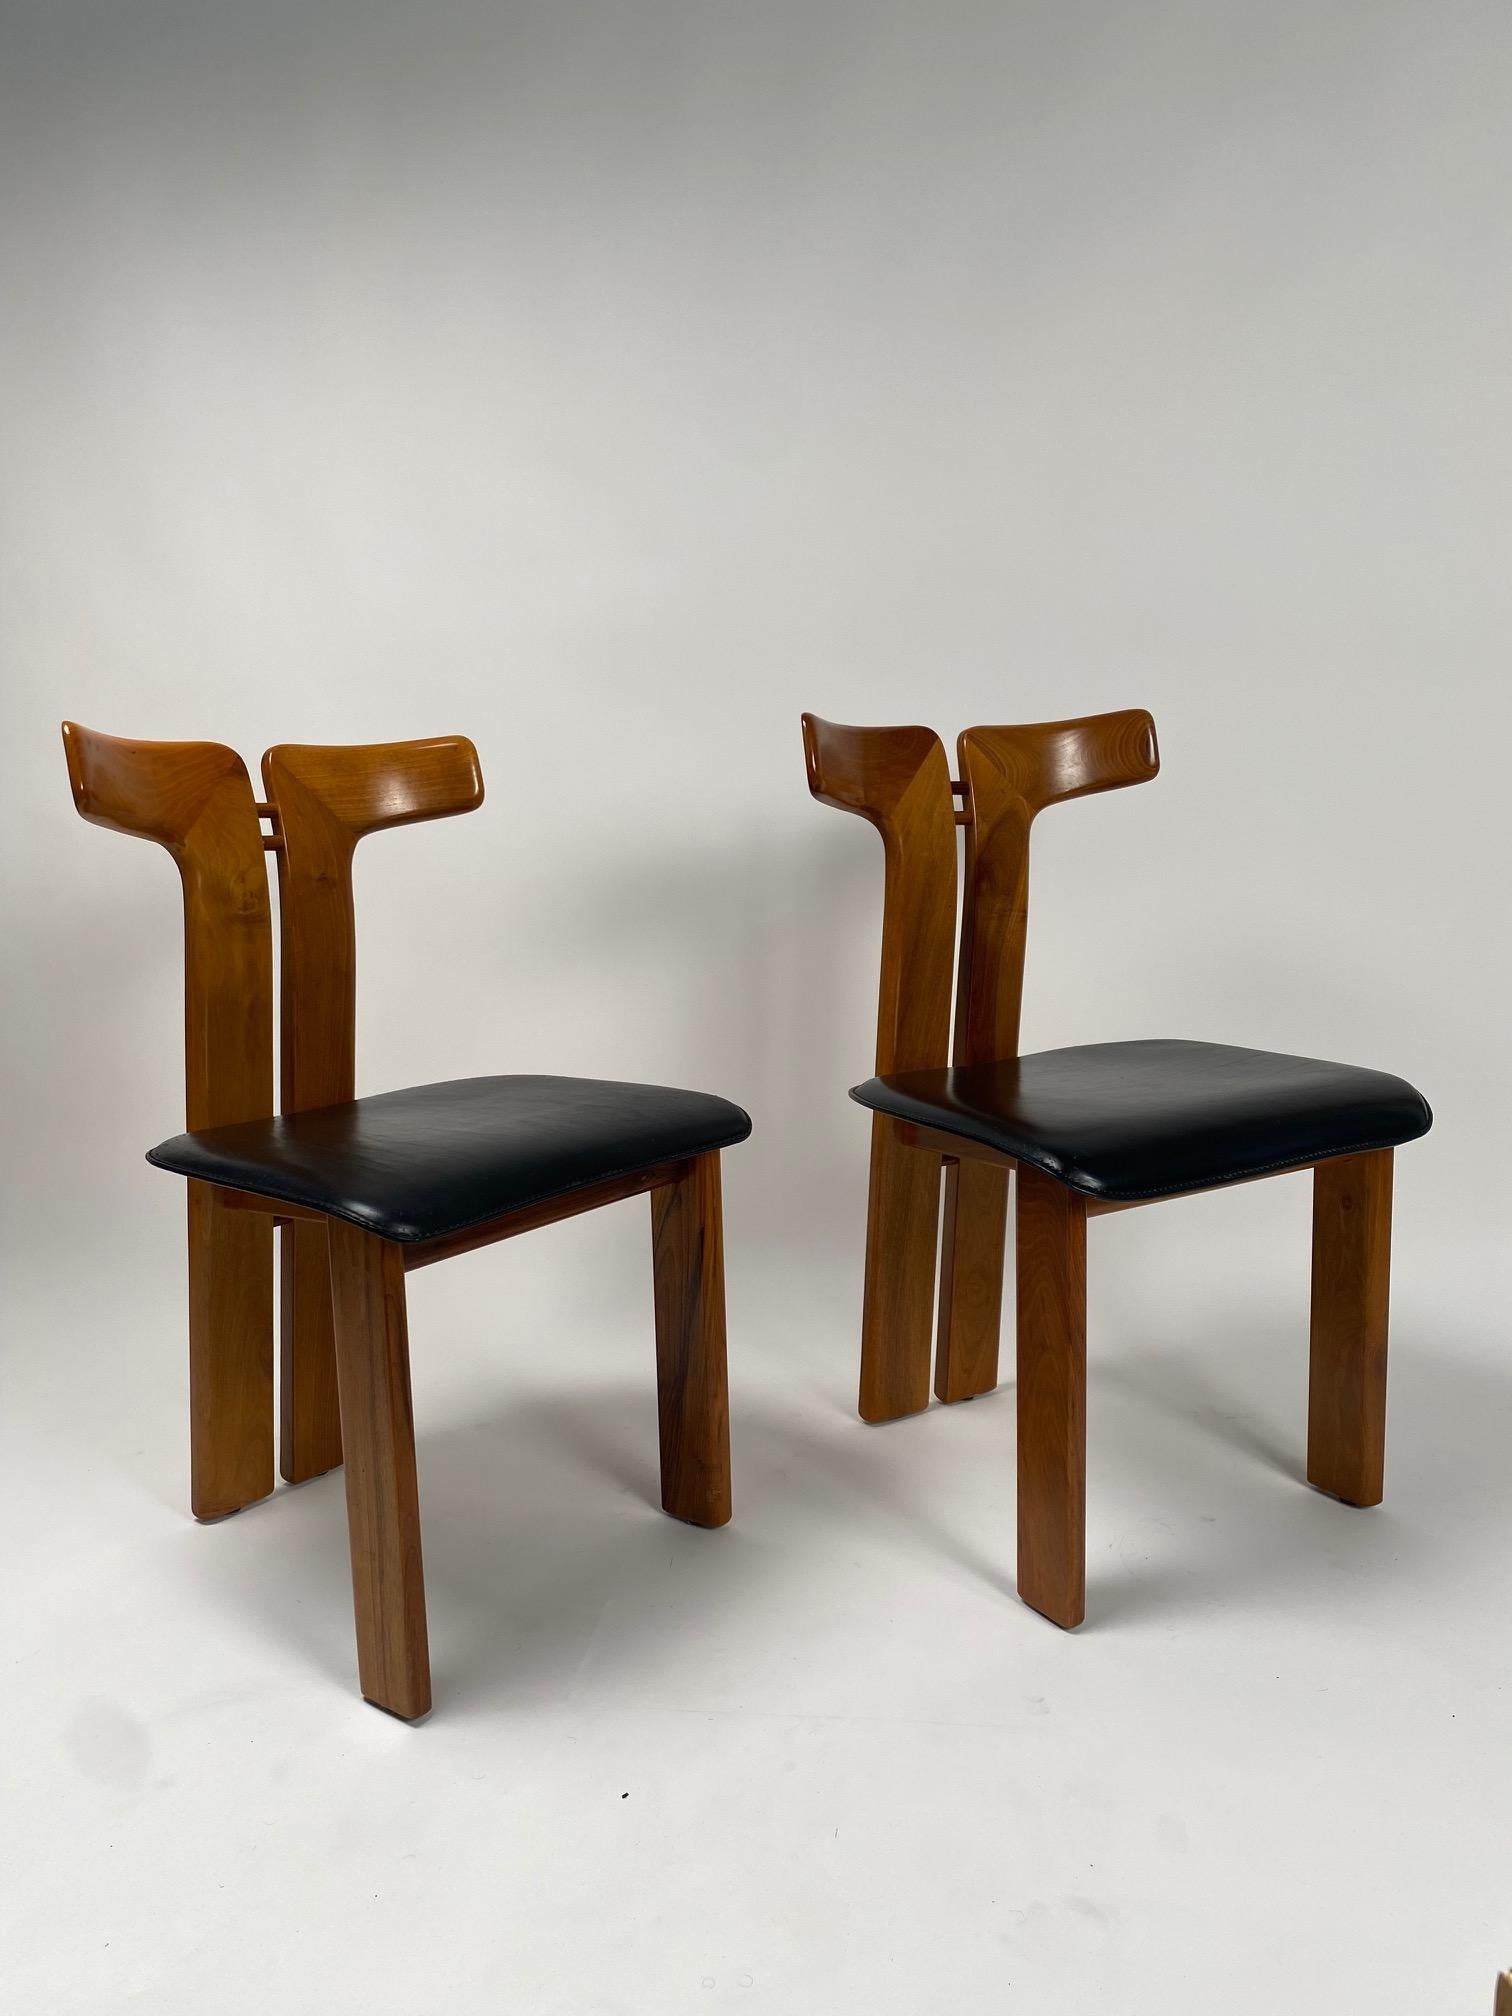 Pierre Cardin, 6 Dining Chairs in Walnut and Leather, 1970s For Sale 2